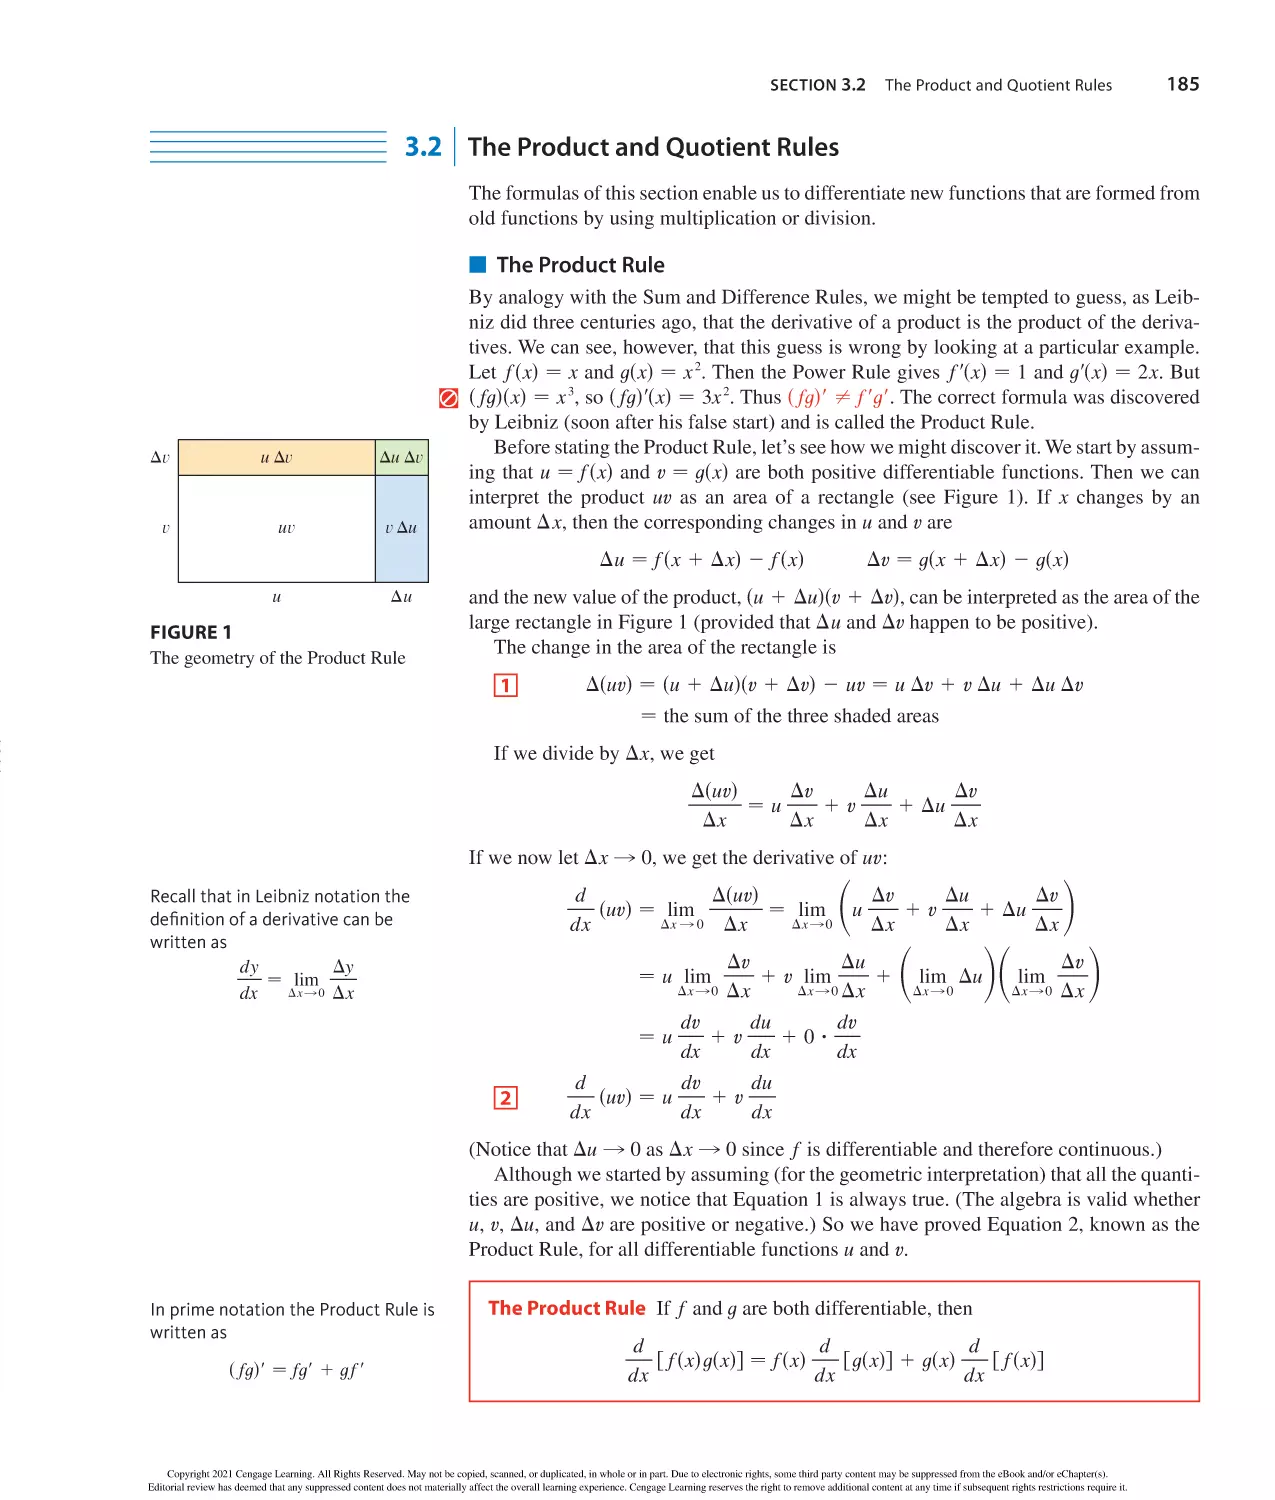 3.2 The Product and Quotient Rules